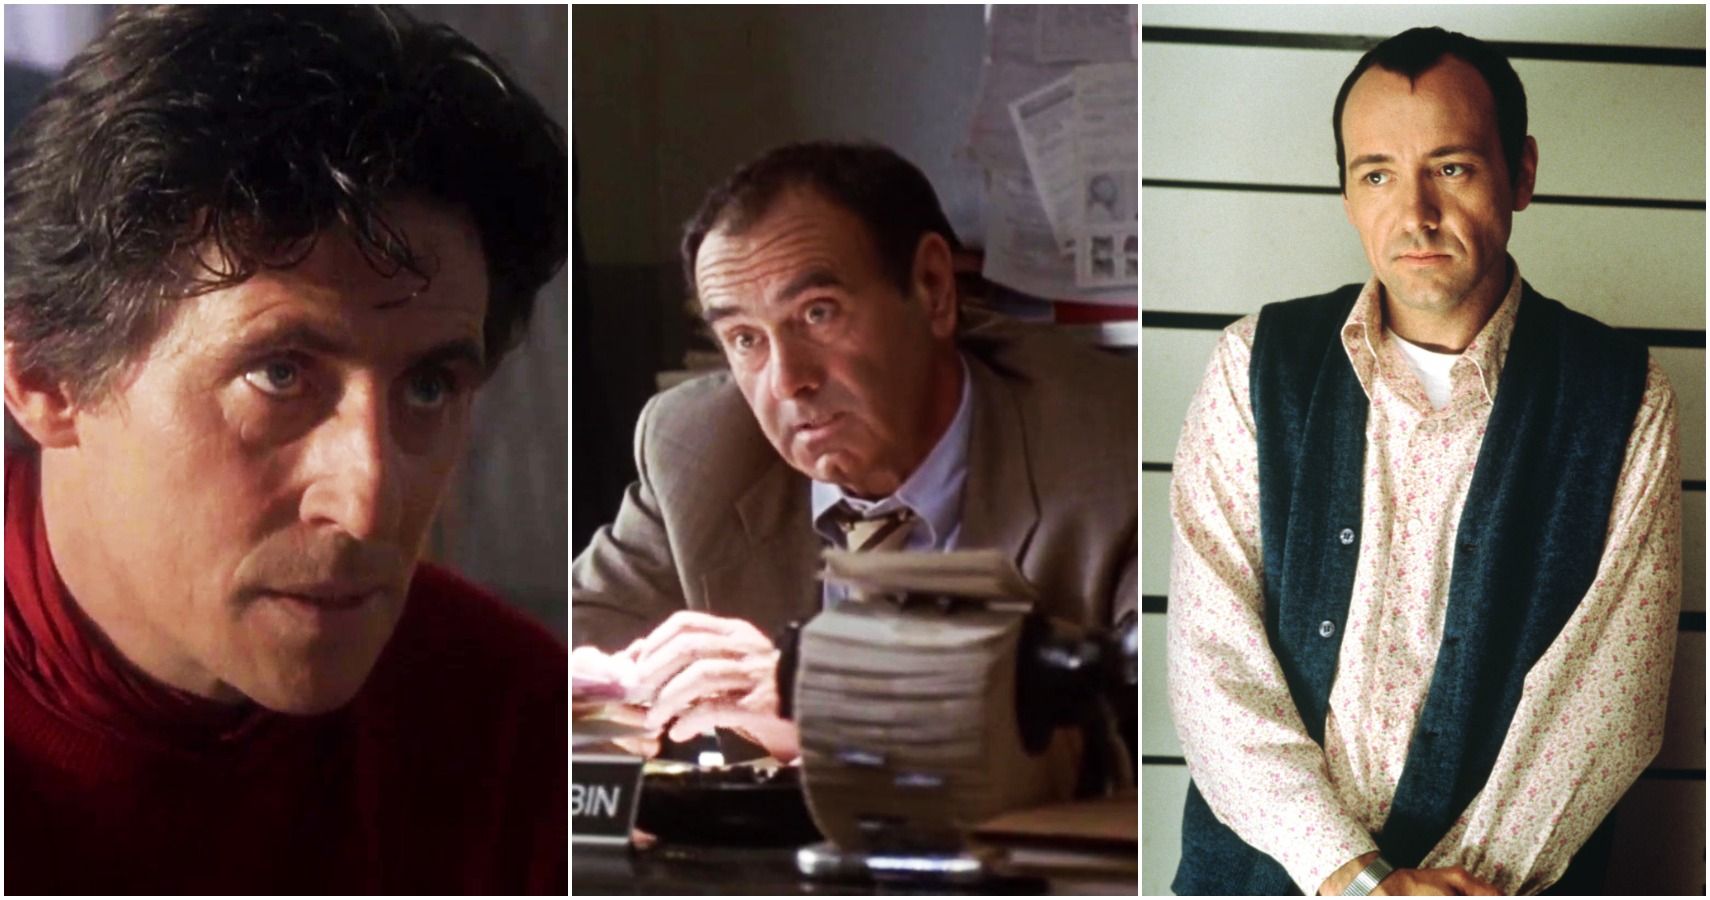 5 Ways The Usual Suspects Has Aged Well (& 5 Ways It Hasn't)